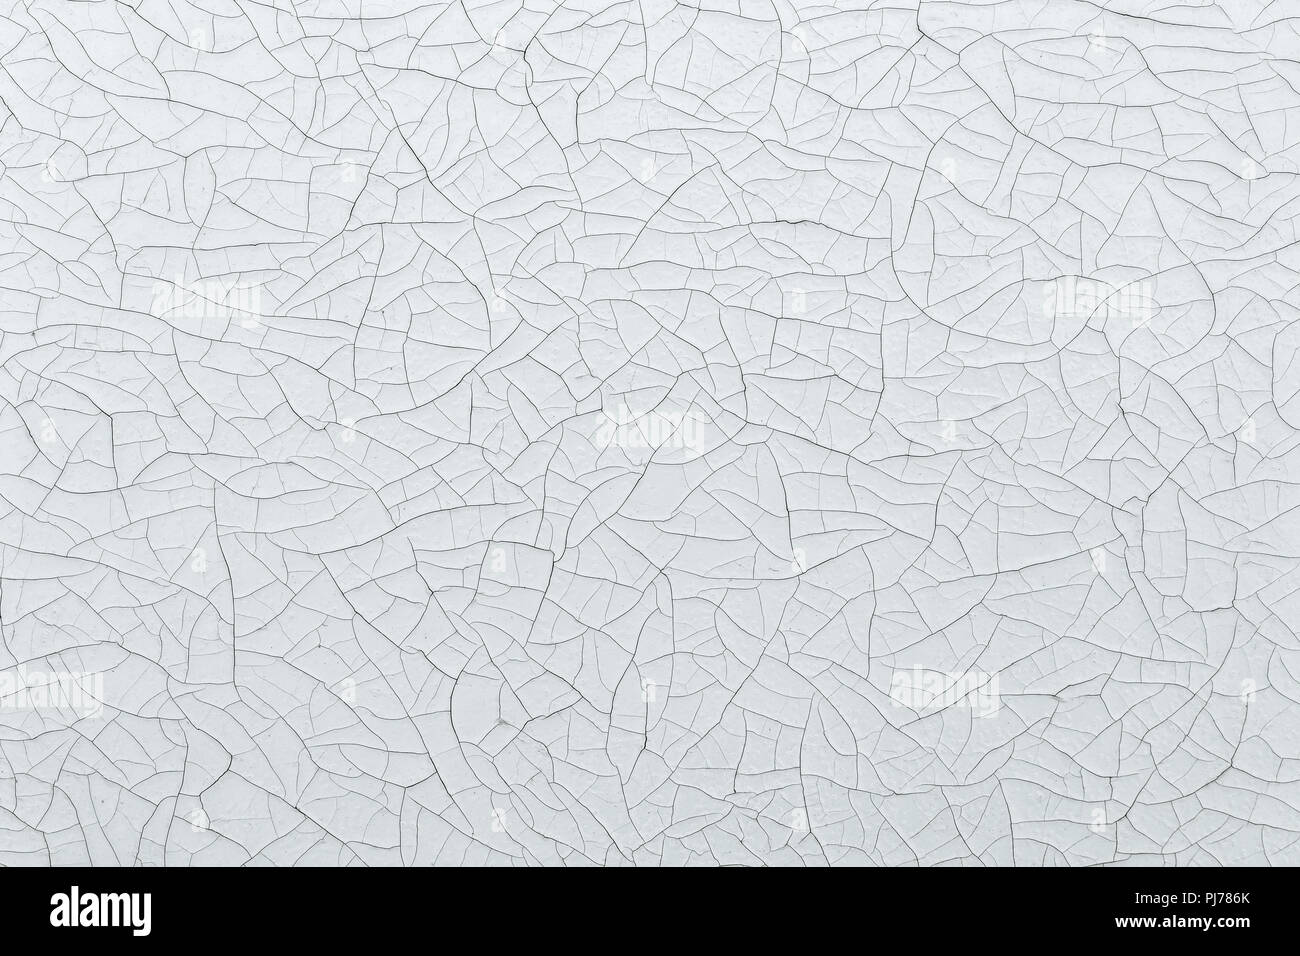 grunge textured background with old cracked white paint Stock Photo